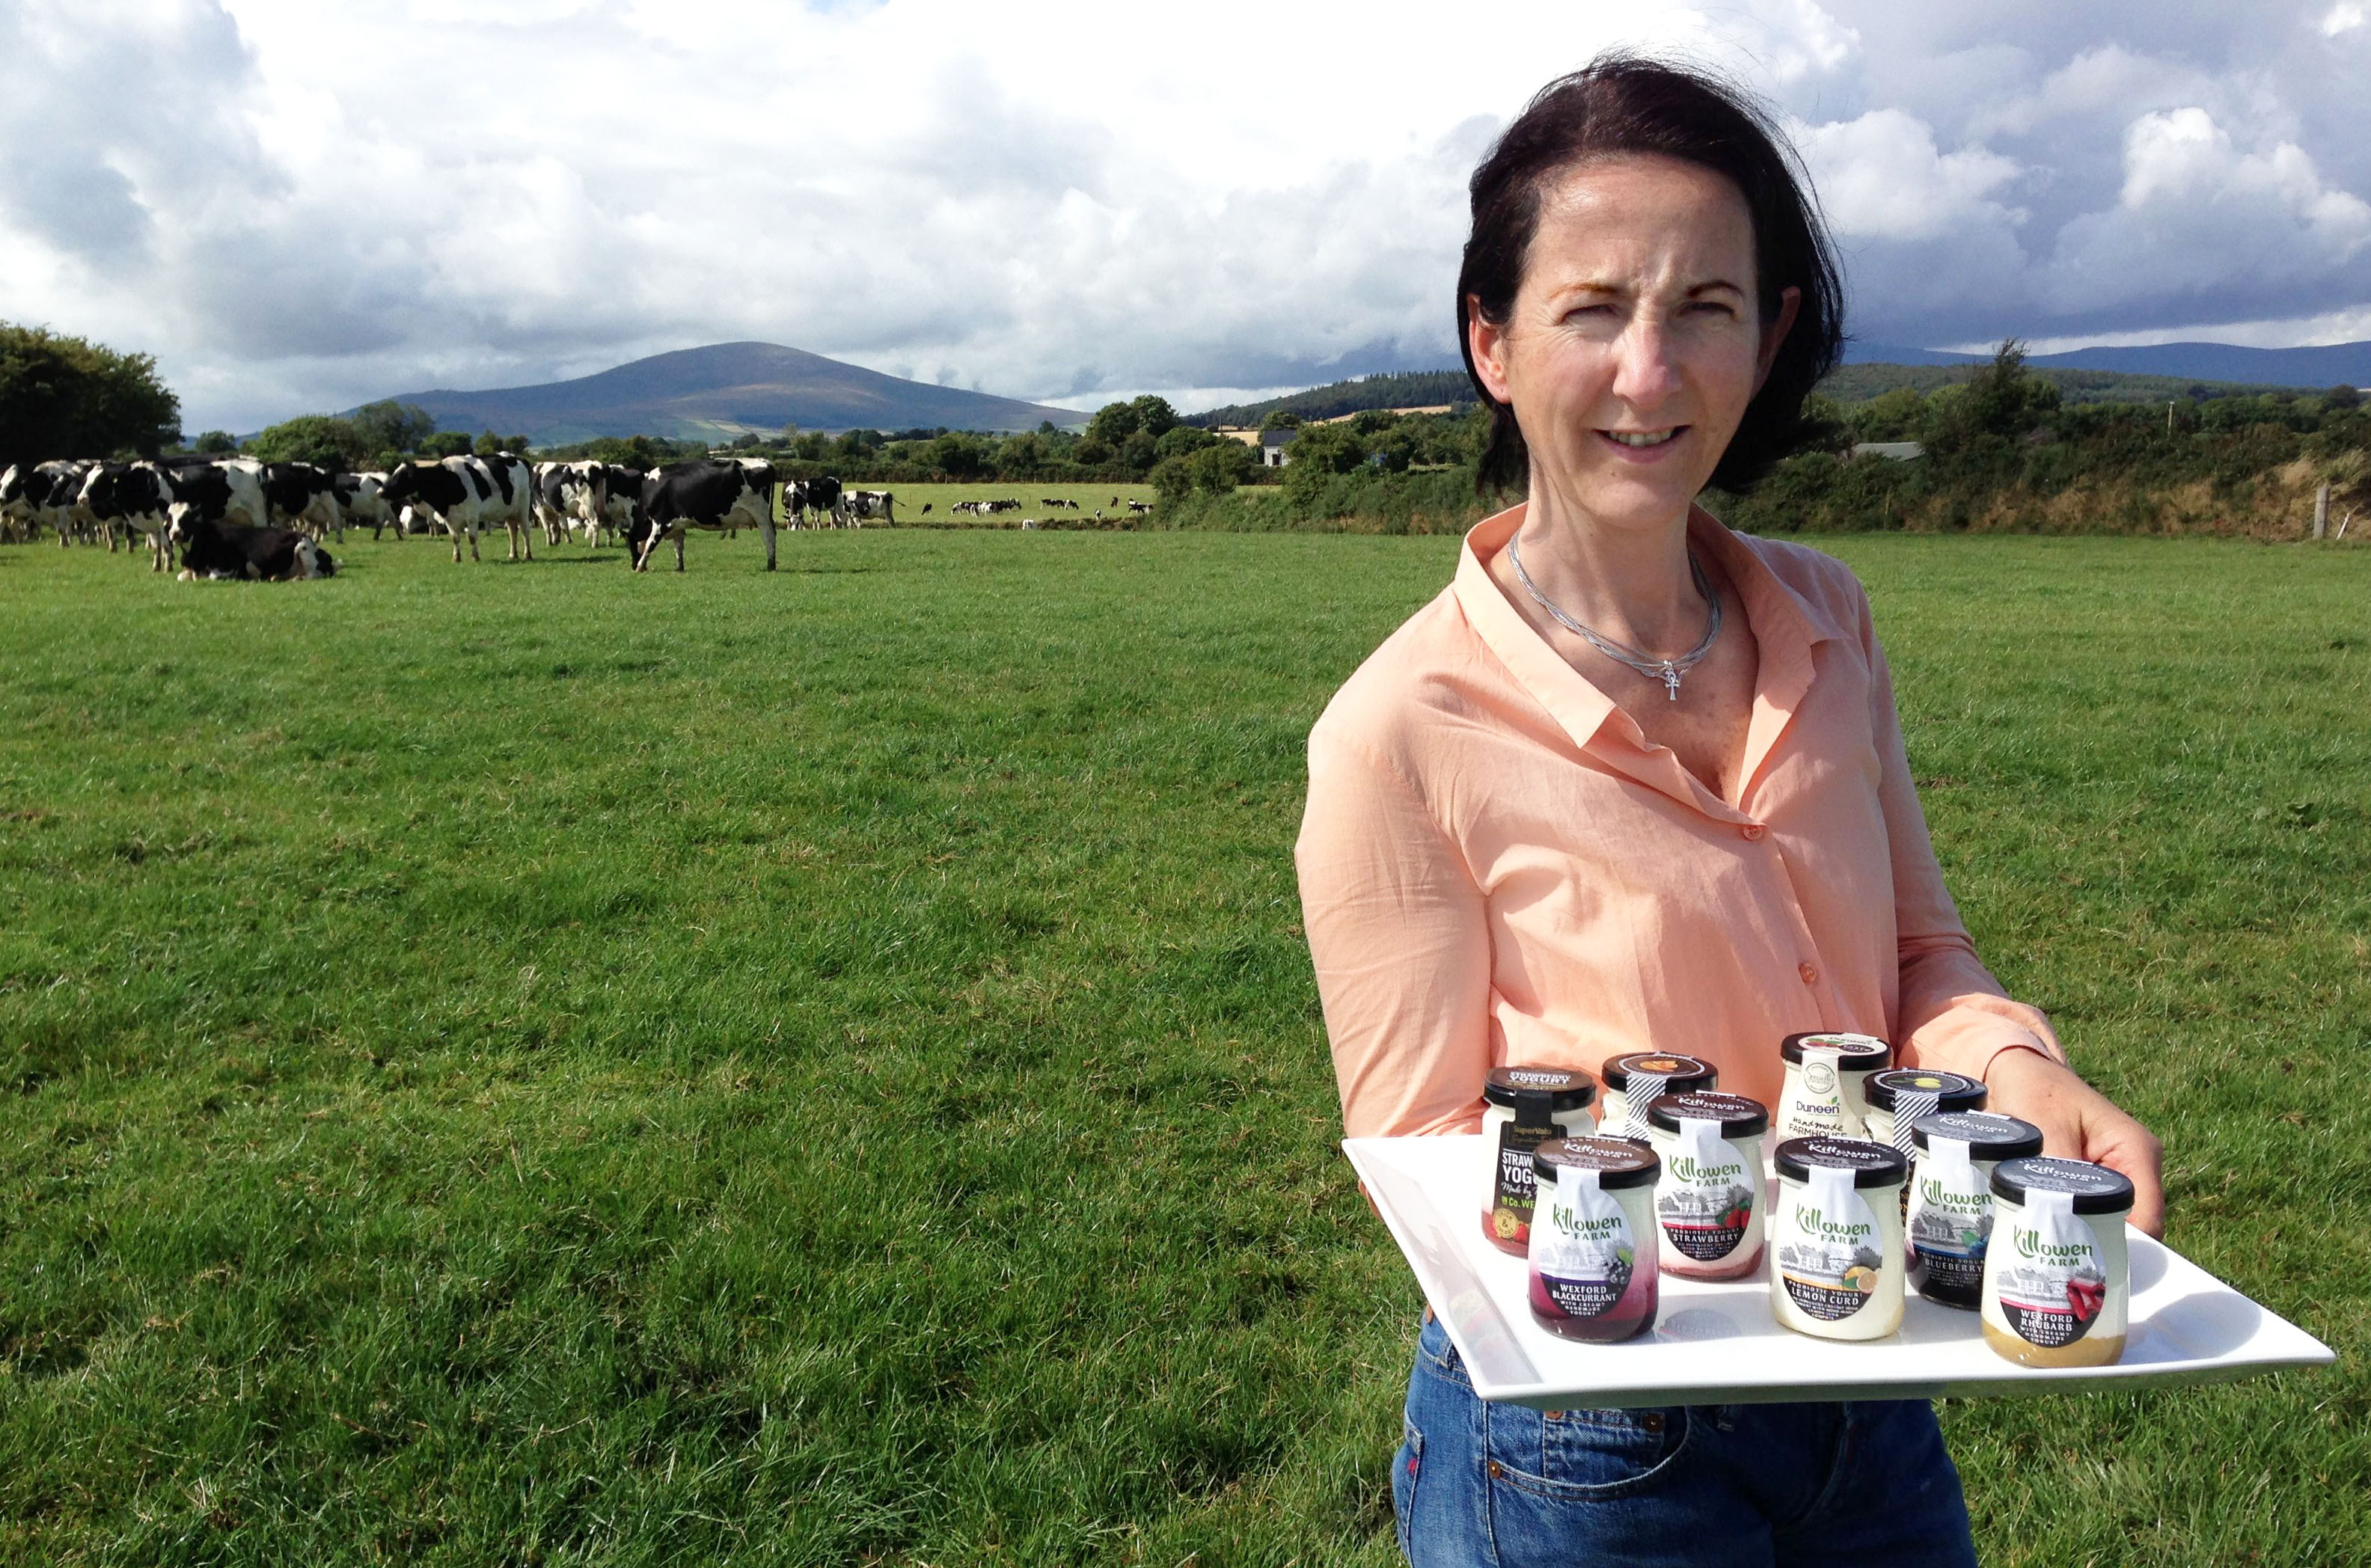 Pauline Dunne, sales manager of Killowen: “We constantly strive to produce the highest quality, best-tasting yogurt, and to have it independently judged in such a demanding environment at Great Taste is a real acid test”.